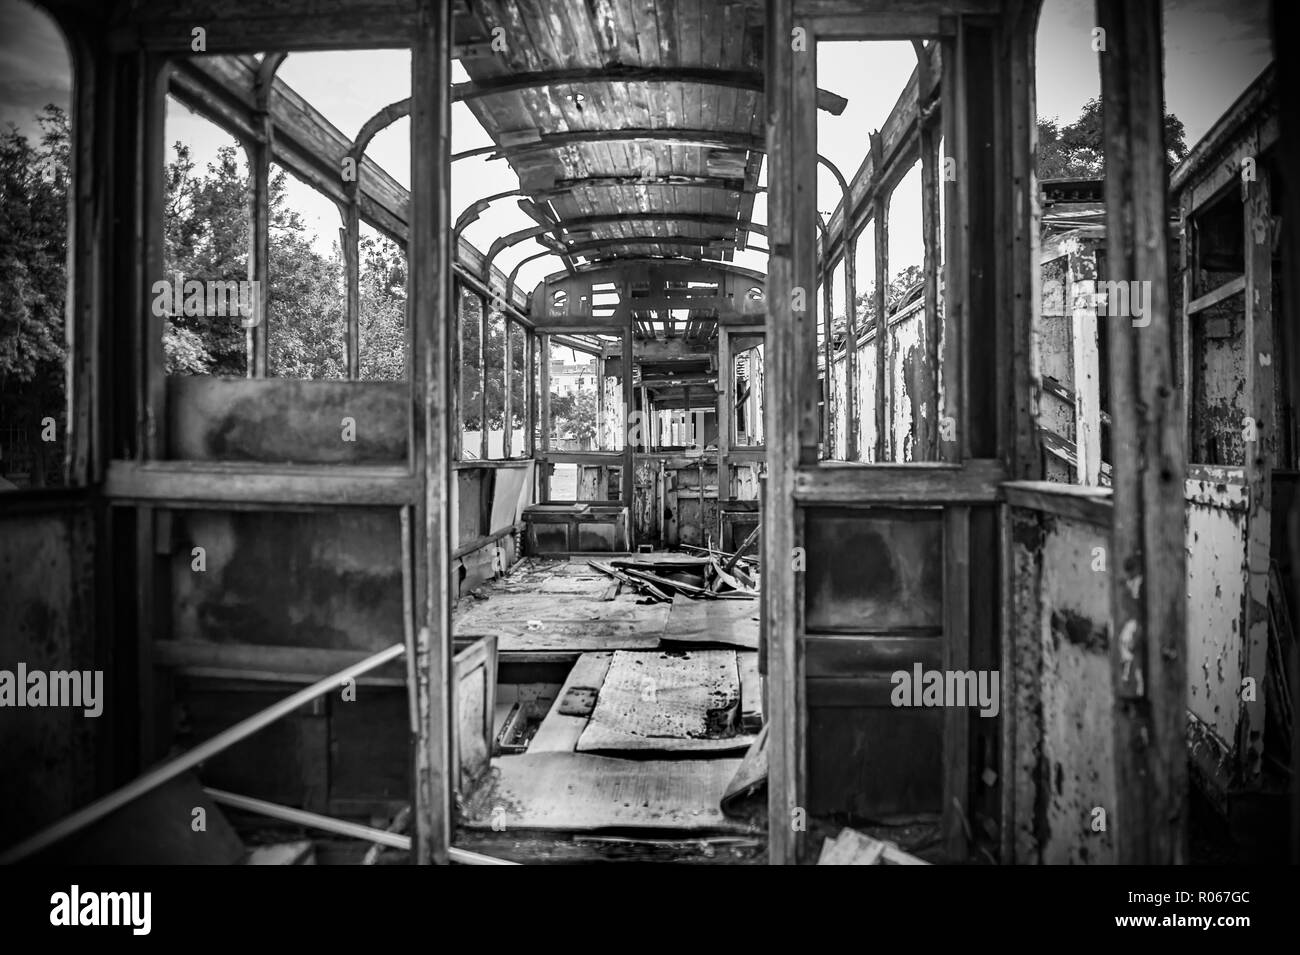 Abandoned and derelict trams in the city of Wroclaw, Poland. Stock Photo